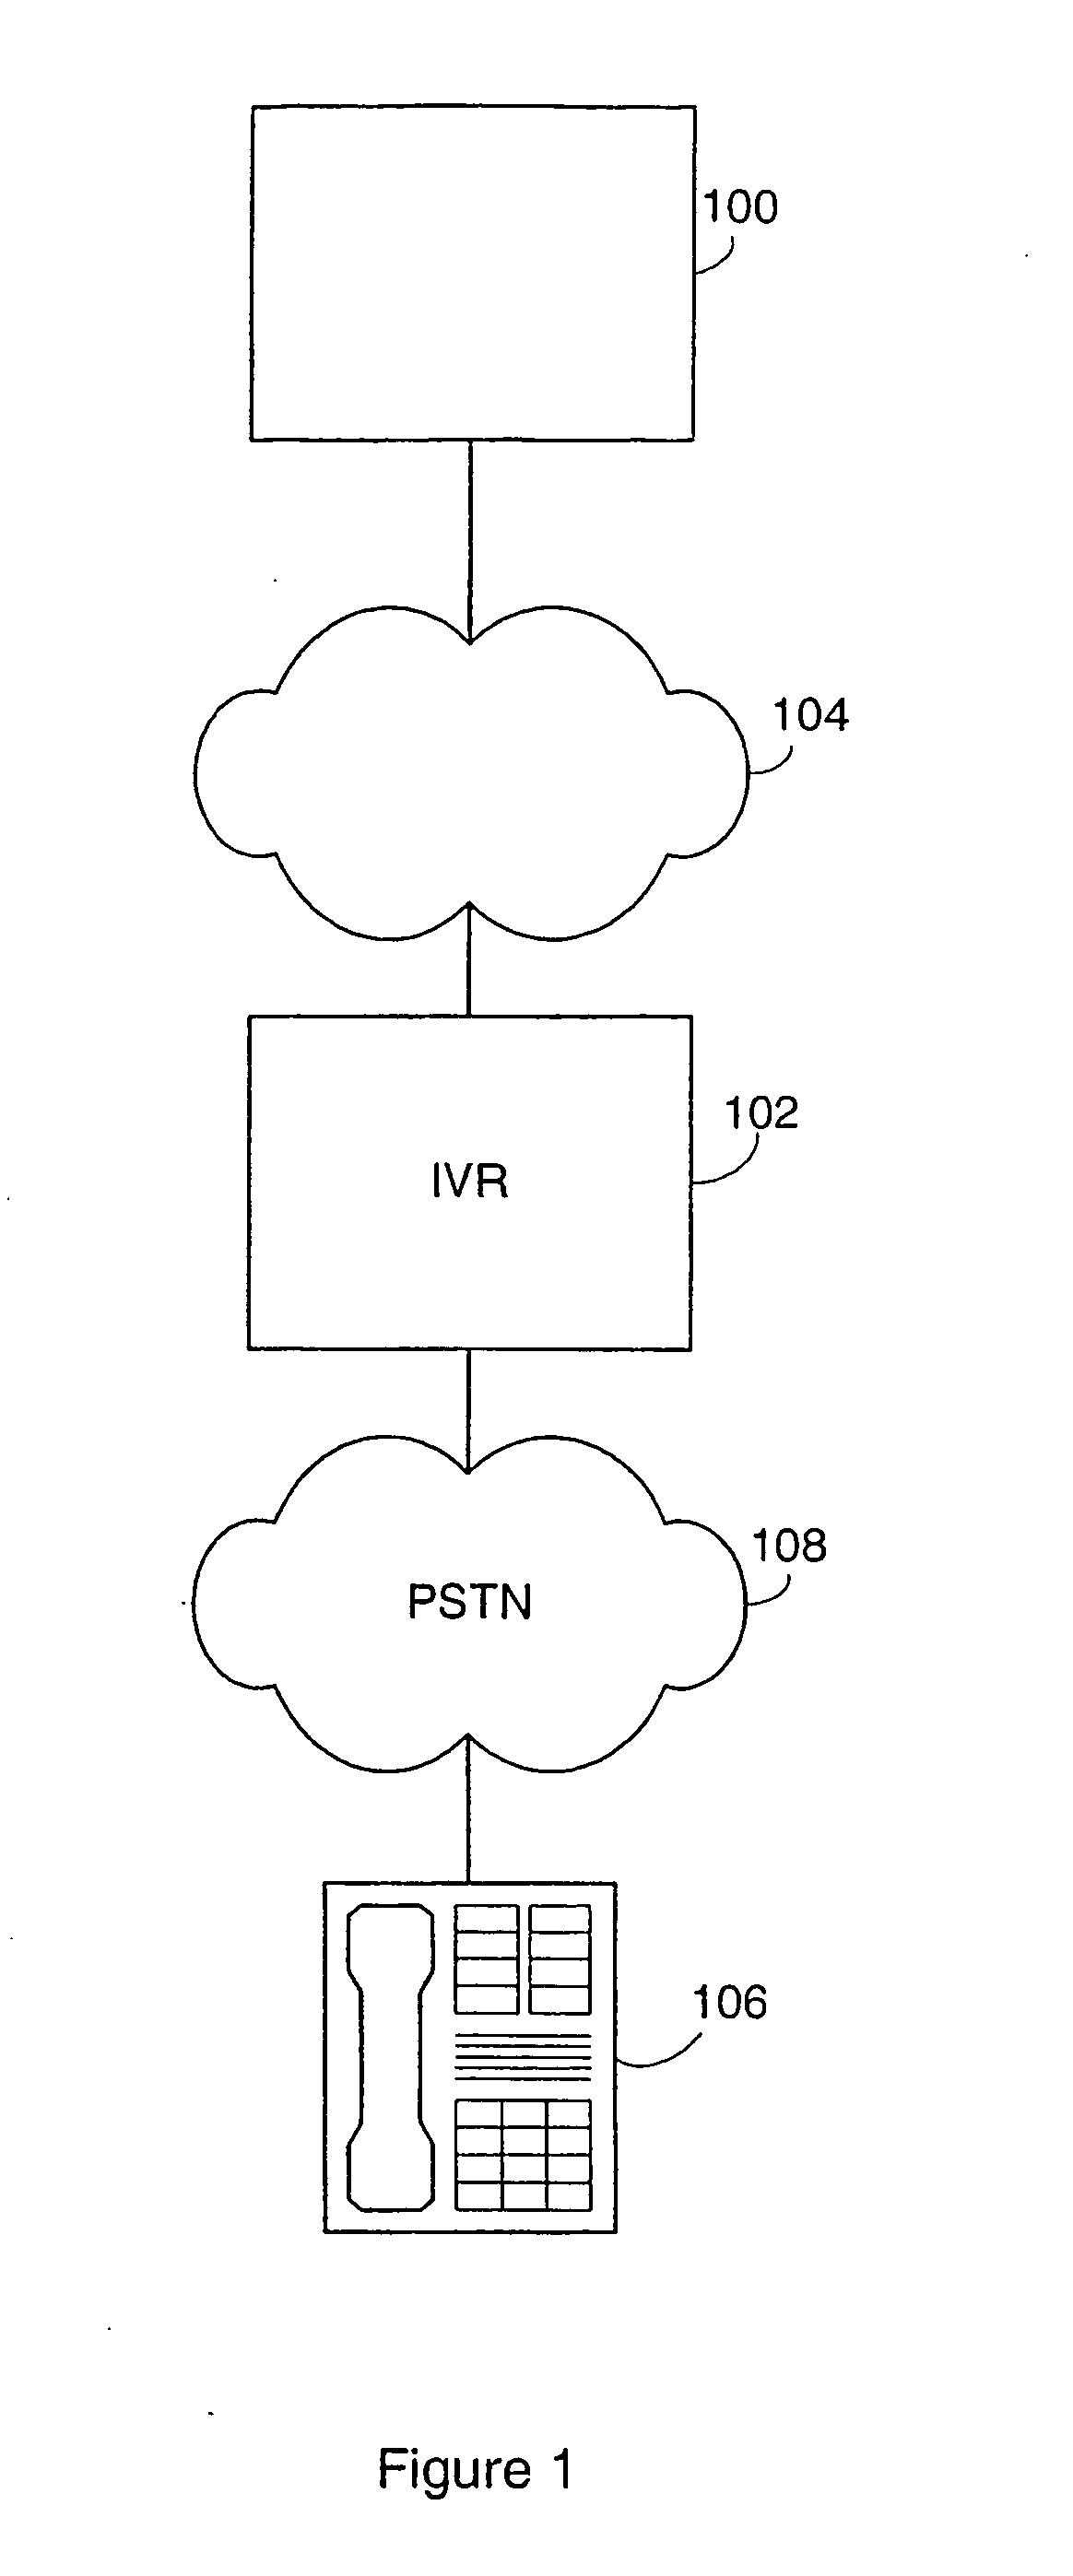 System and process for developing a voice application